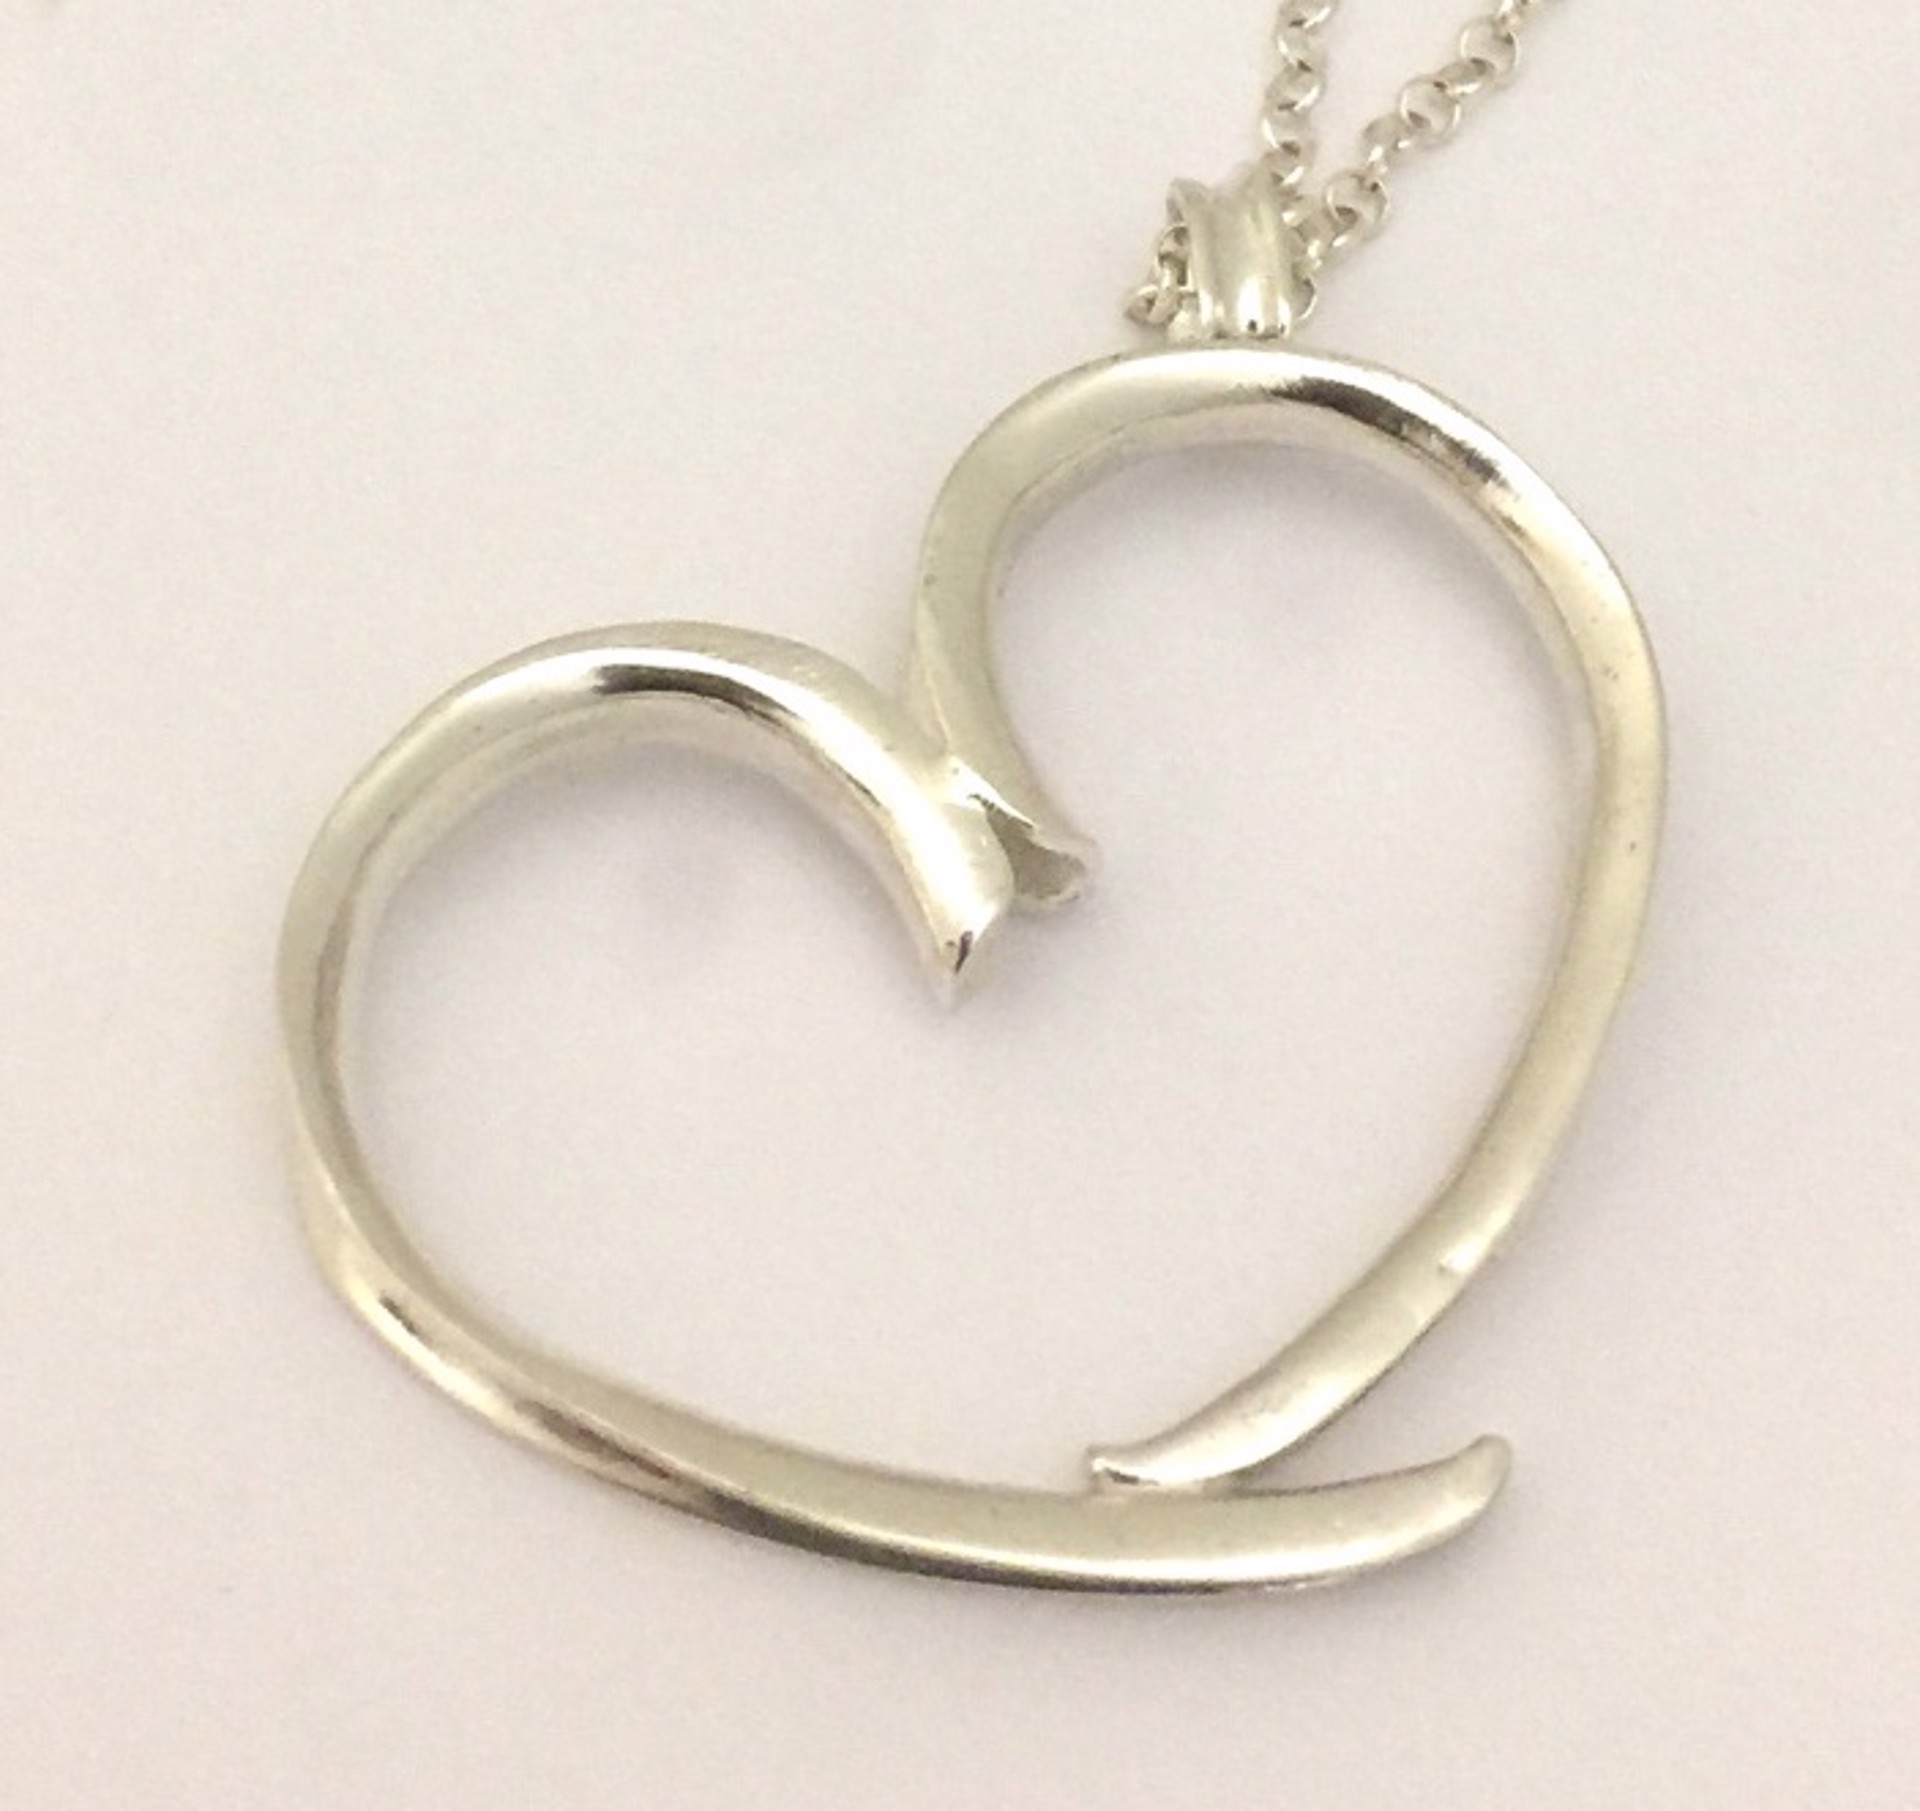 Necklace - Sterling Silver Heart by Pattie Parkhurst